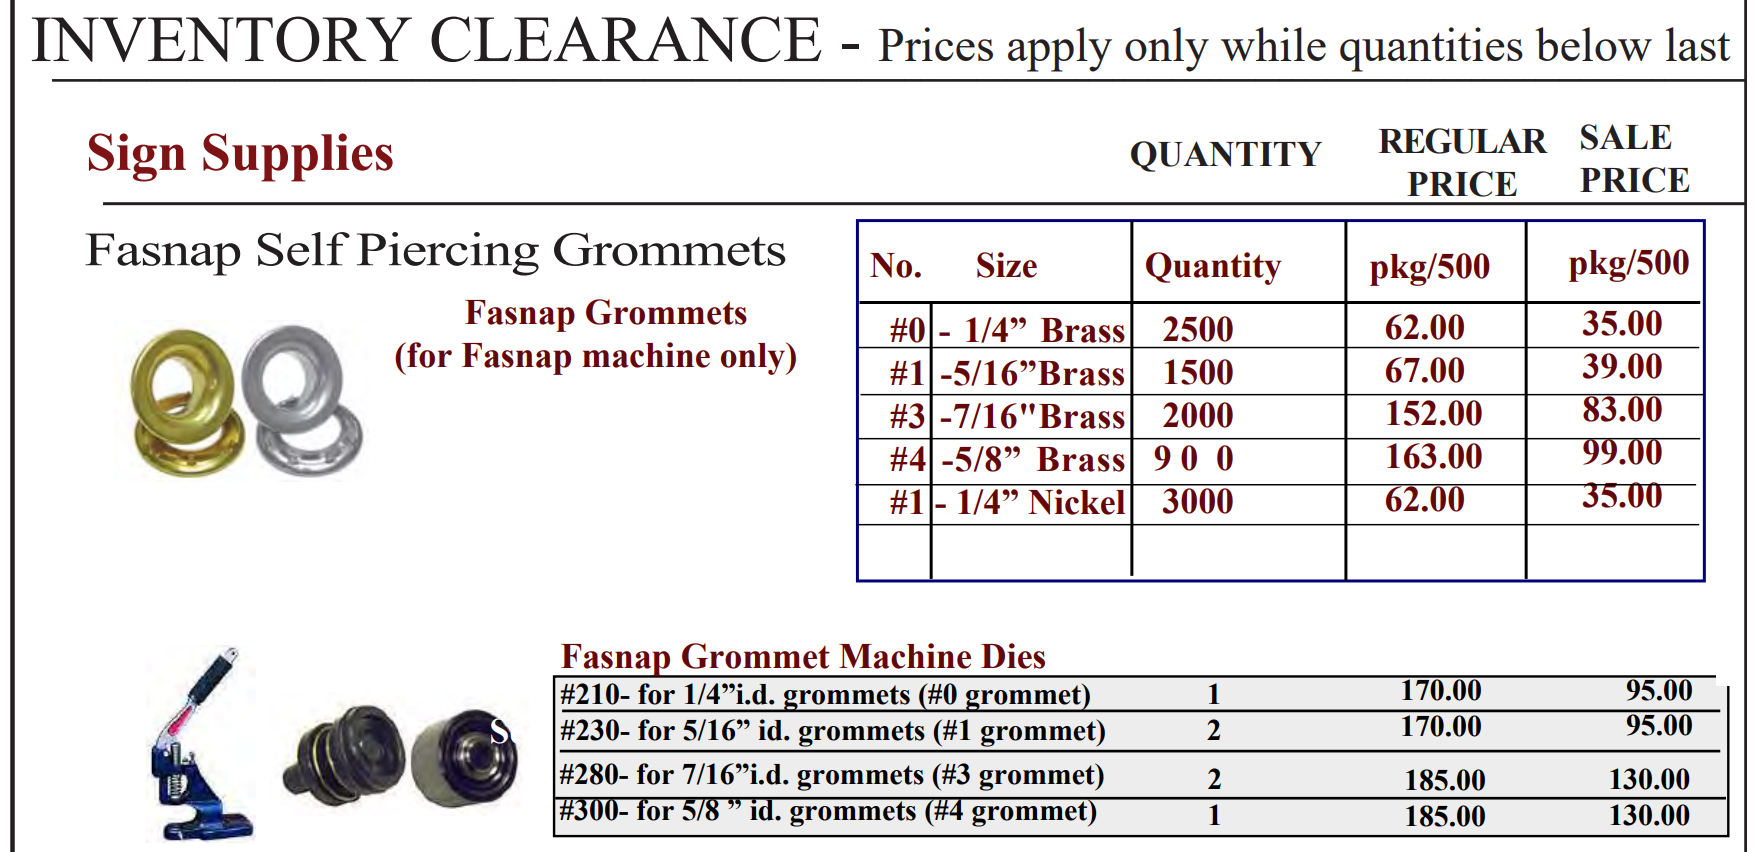 fasnap - INVENTORY CLEARANCE - Sign Supplies - Grommets & Accessories